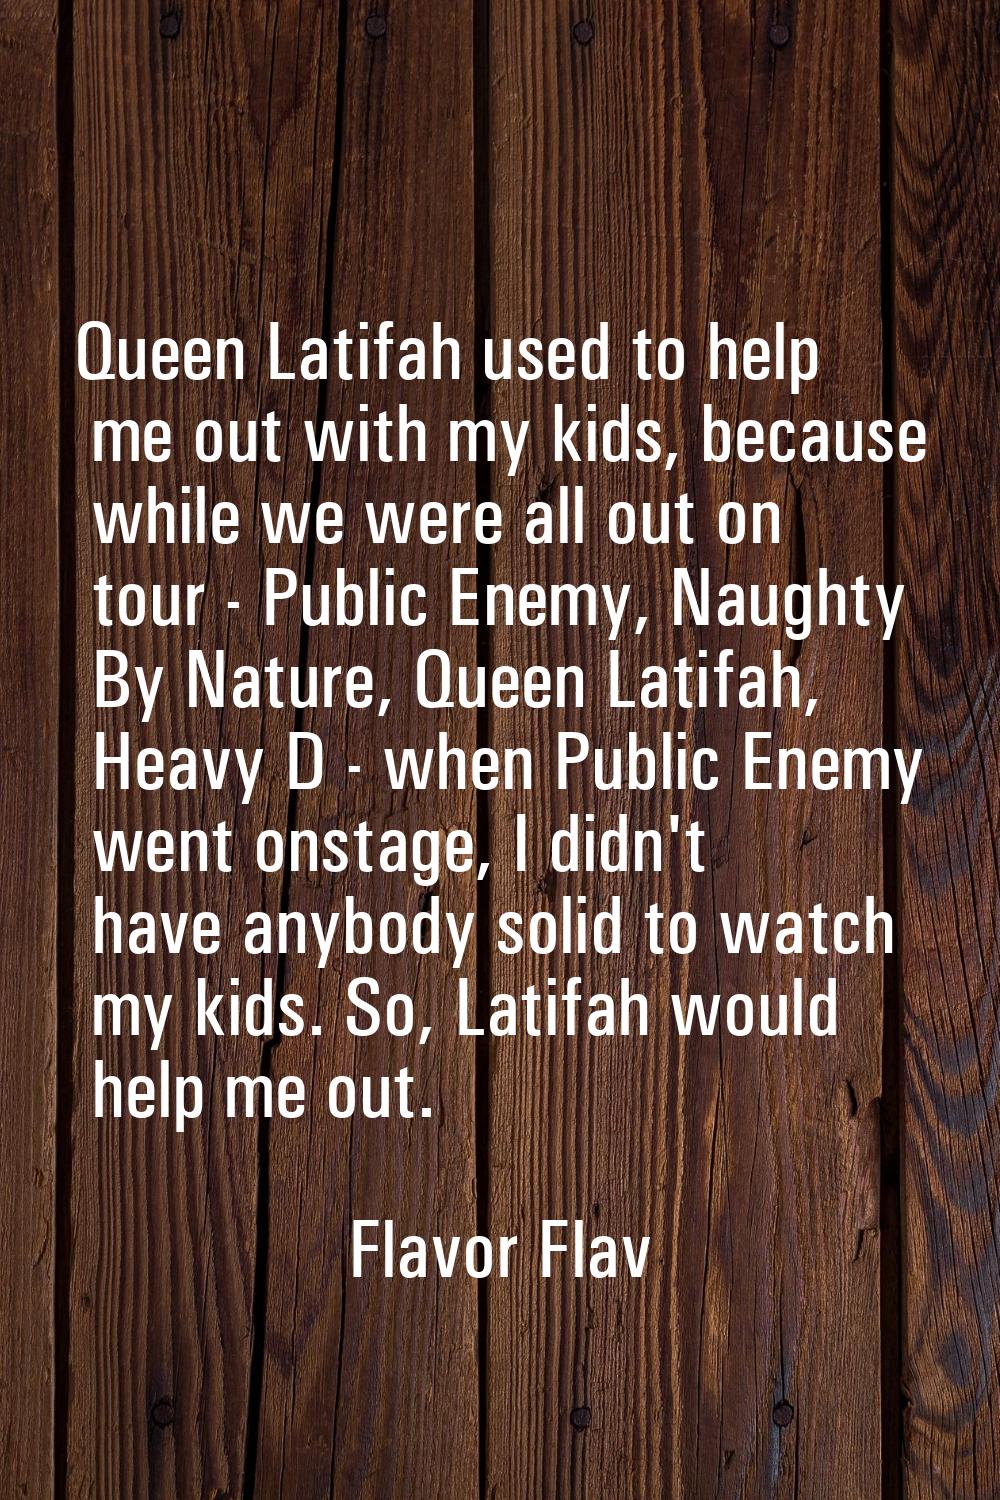 Queen Latifah used to help me out with my kids, because while we were all out on tour - Public Enem